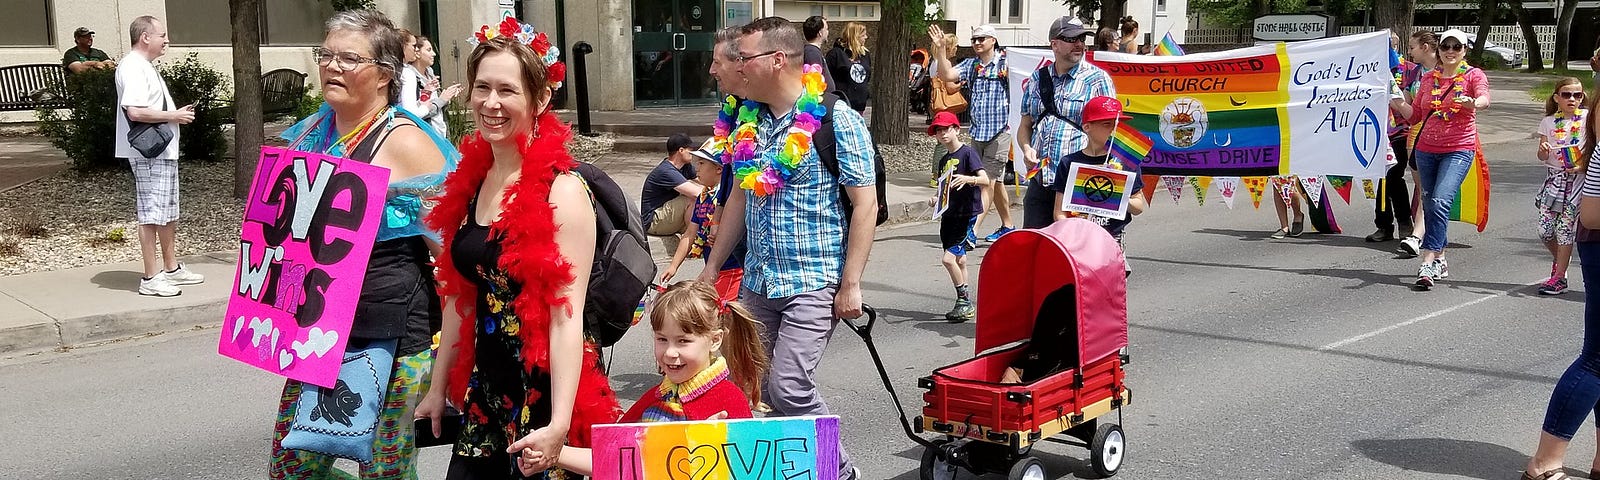 People dressed in bright colours walking in a Pride parade. A girl is holding a rainbow sign that says, “Love conquers hate!” There is a banner for a United Church that says, “God’s Love Includes All.”